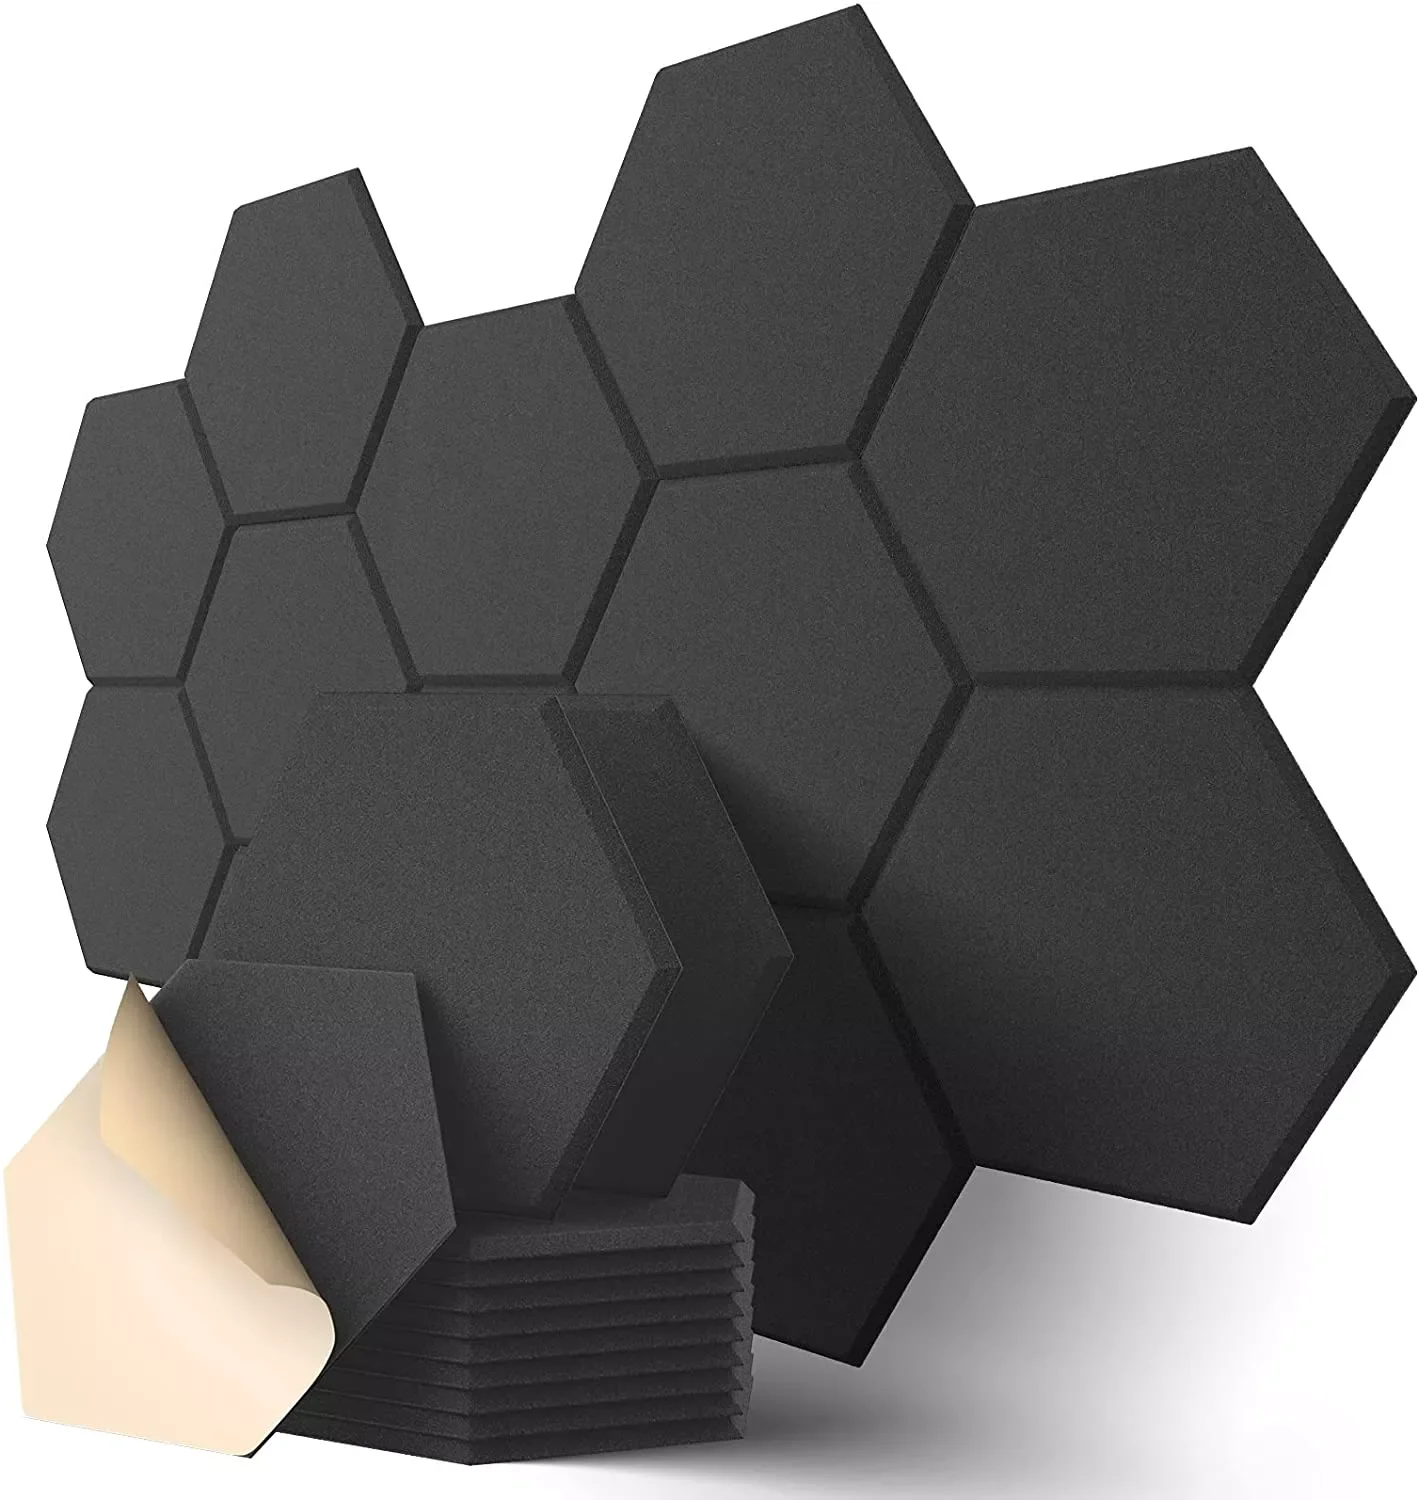 

12 Pcs Hexagonal Self-adhesive Acoustic Panels Sound Absorbing Soundproof Wall Panels To Absorb Noise Sound Proofing Foam